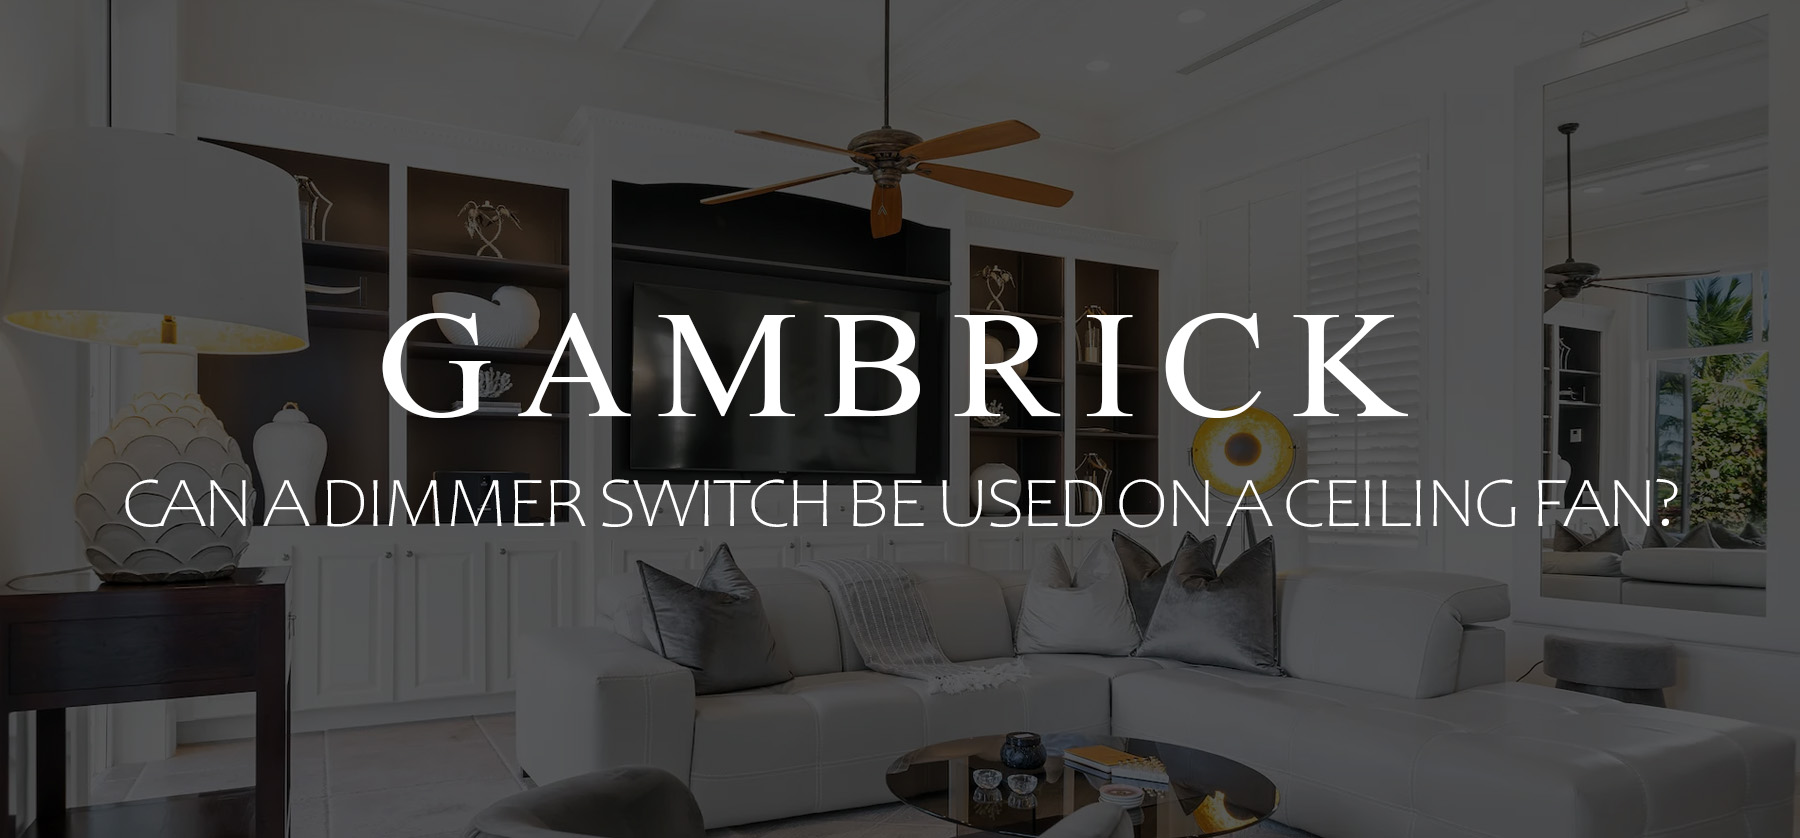 can a dimmer switch be used on a ceiling fan banner